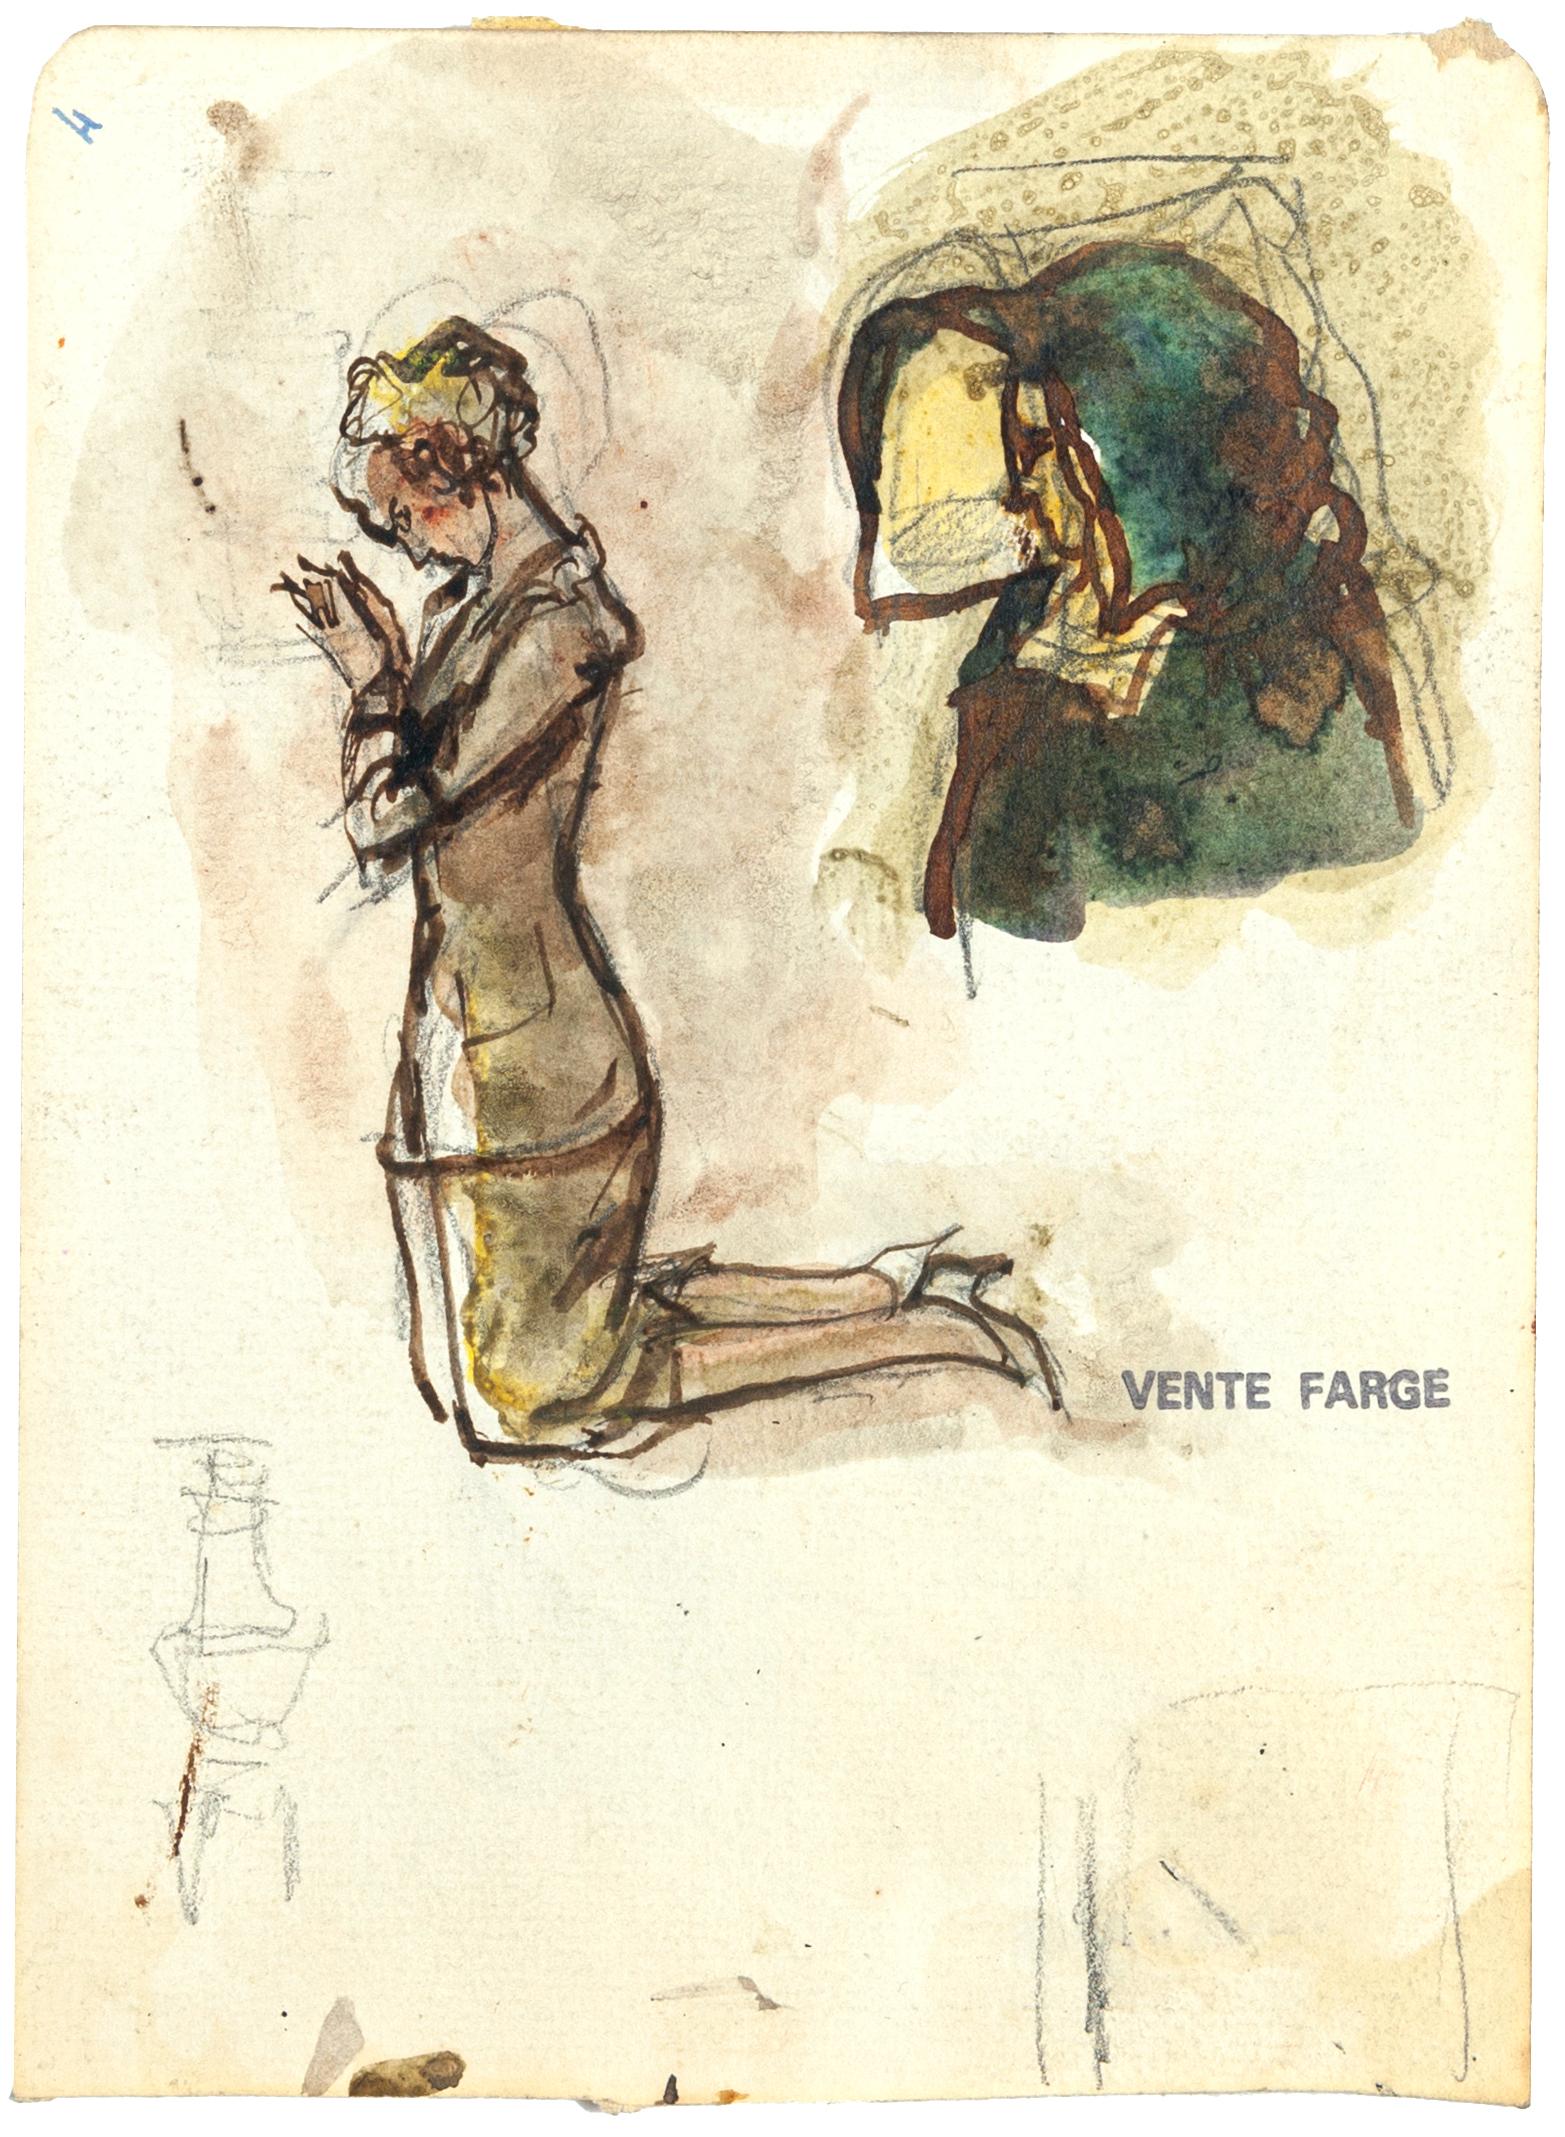 Unknown Figurative Art - Study of Figures - Original Pencil and Watercolor on Paper - Mid 20th Century